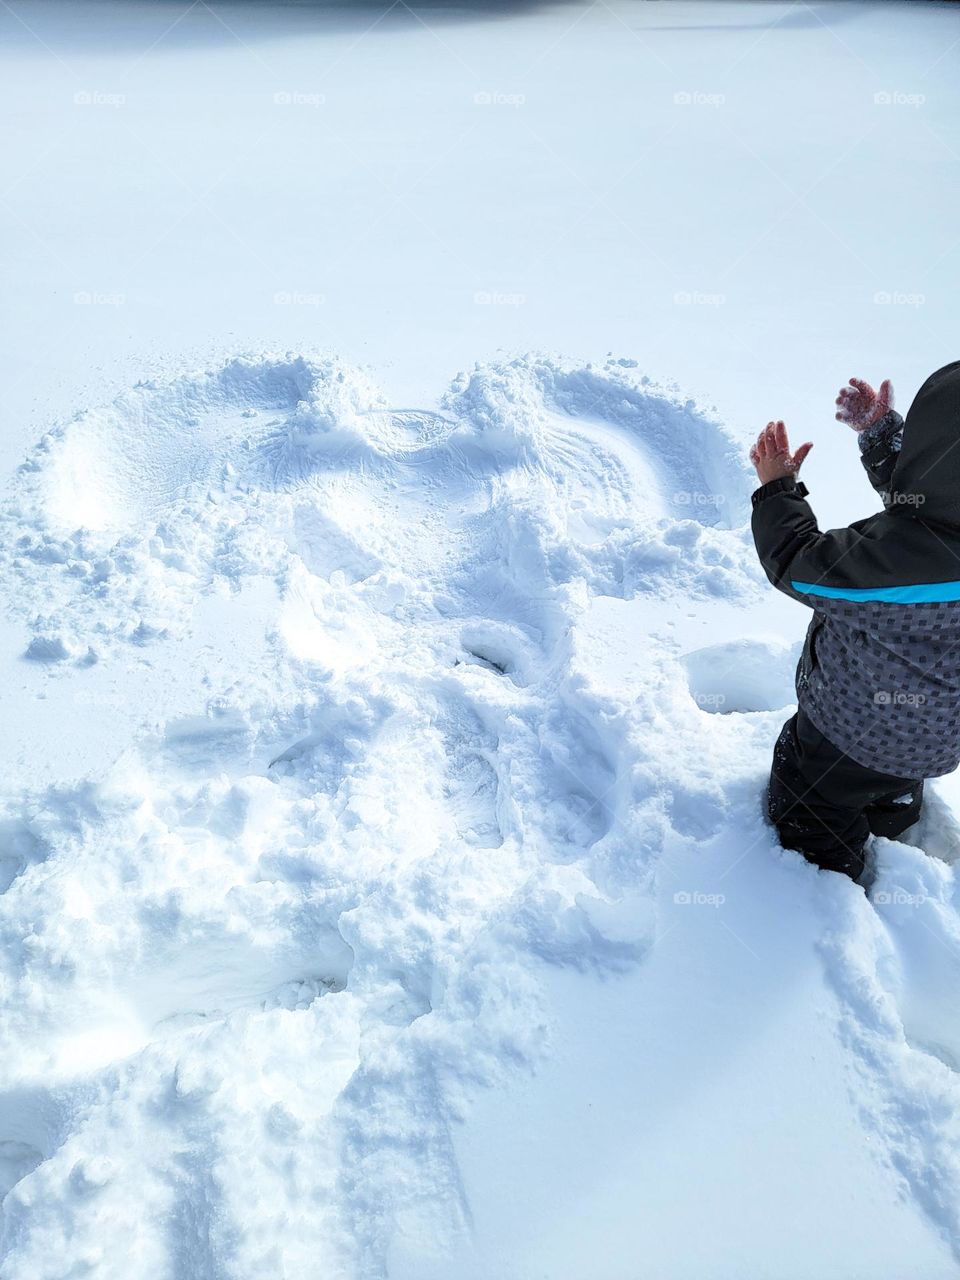 Beautiful snow angel making on a snowy day.